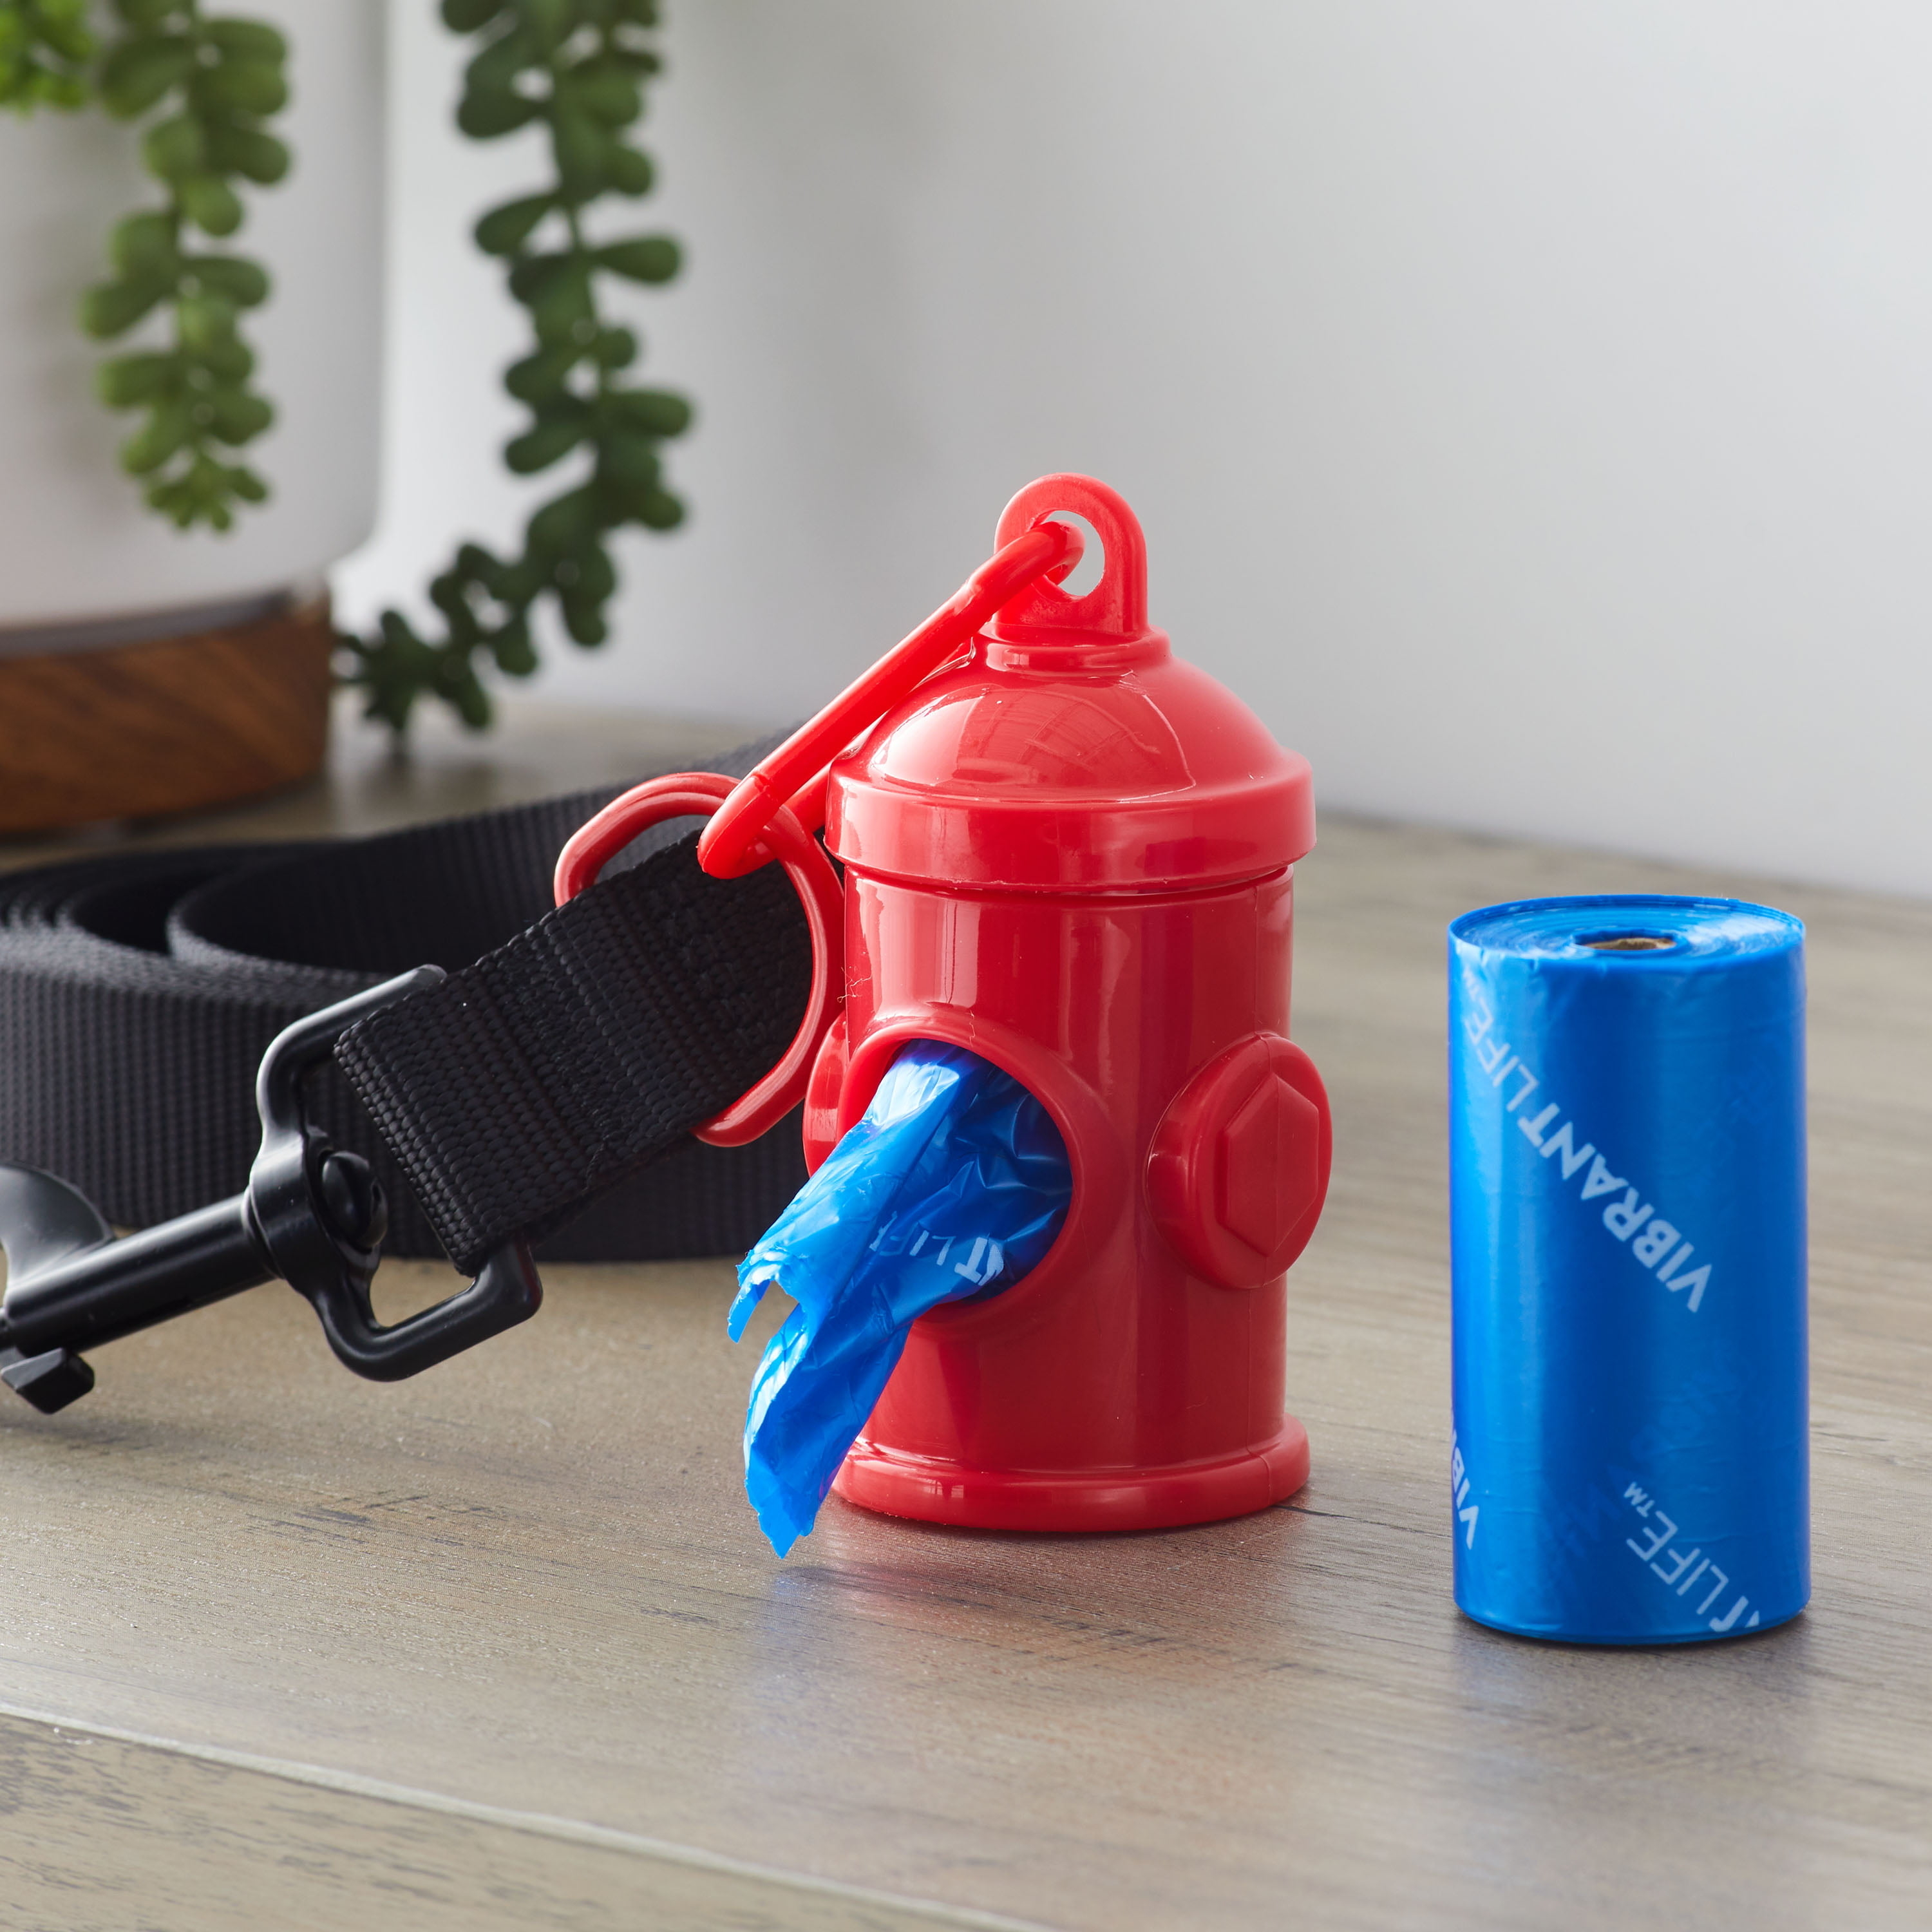 Red dog waste bag dispenser attached to a leash with a blue bag roll next to it. Perfect for pet owners on the go